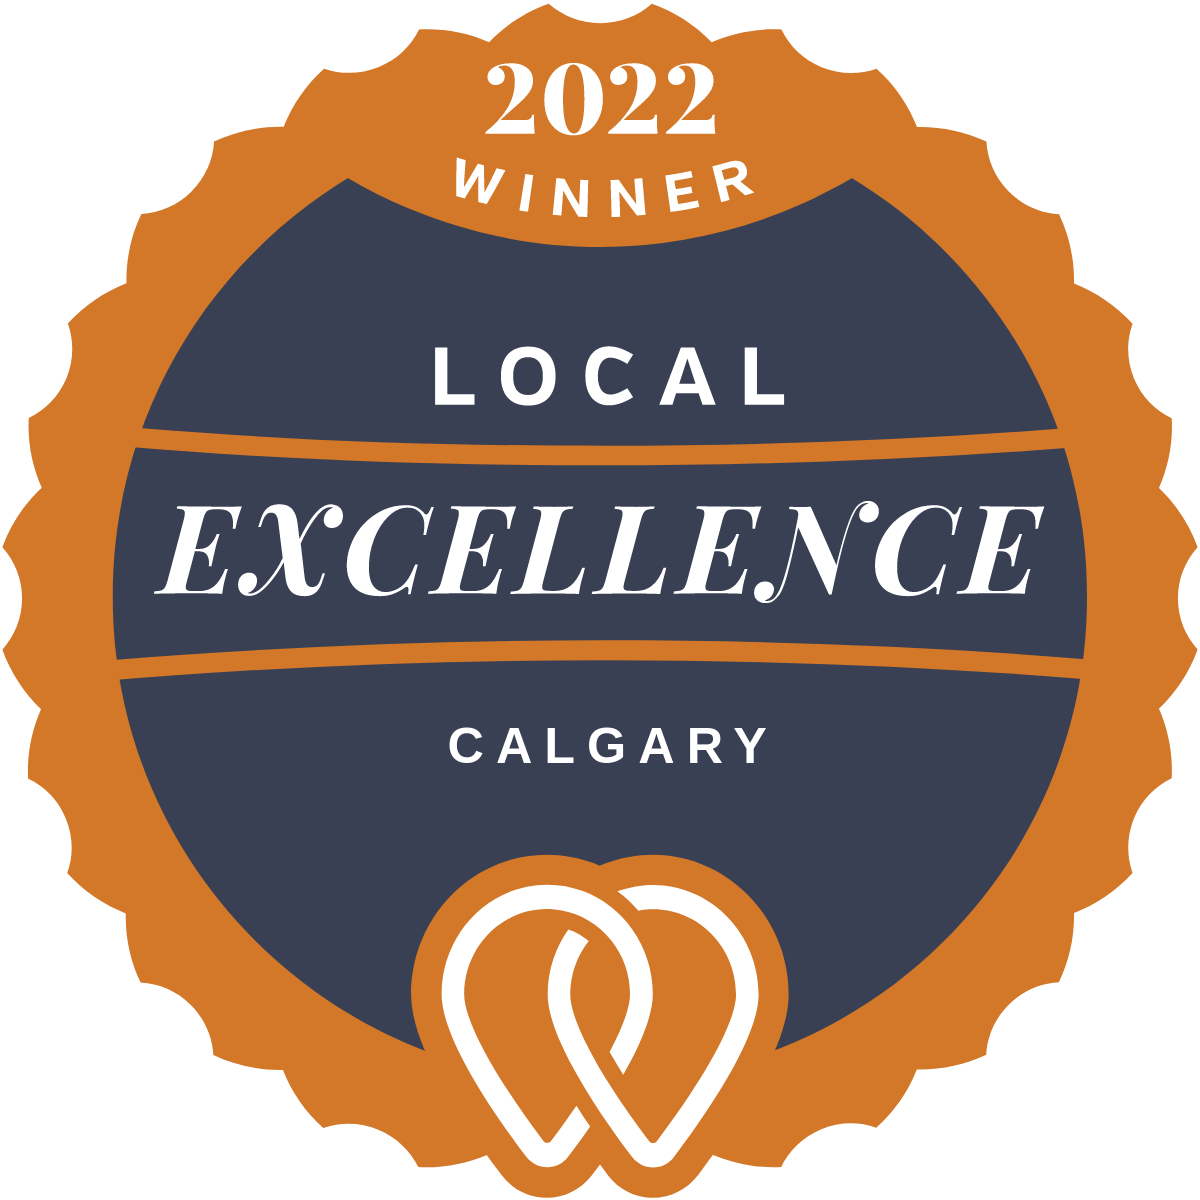 2022 Local Excellence Winner in Calgary